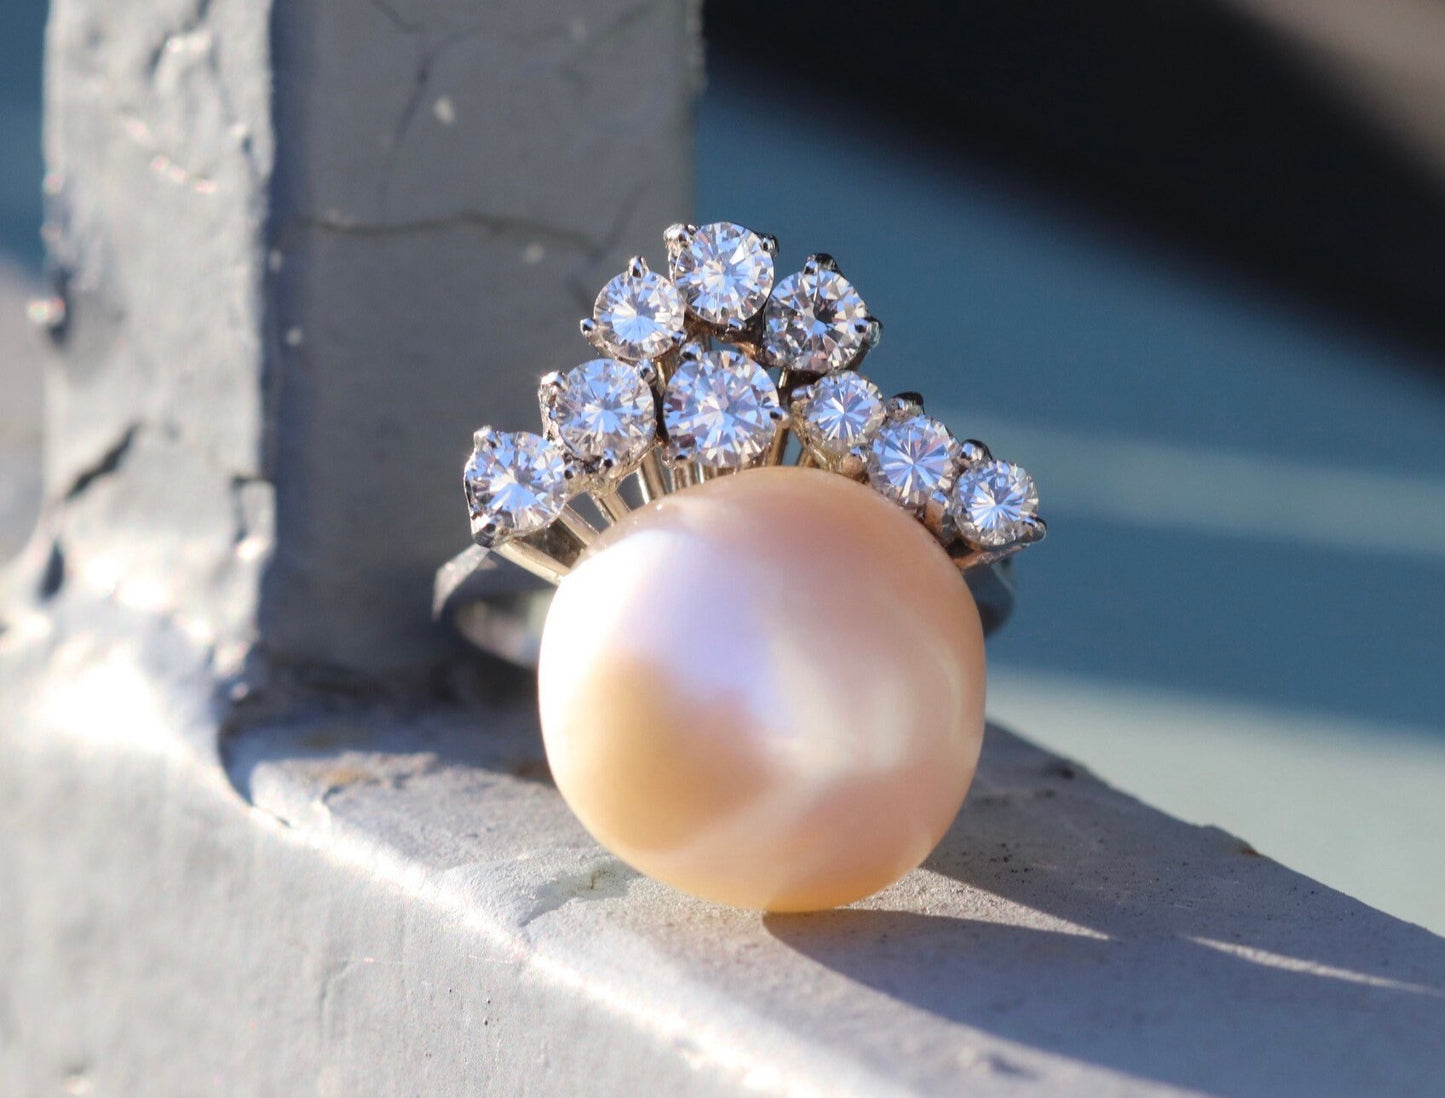 Diamond and south sea pearl ring set in 14k white gold